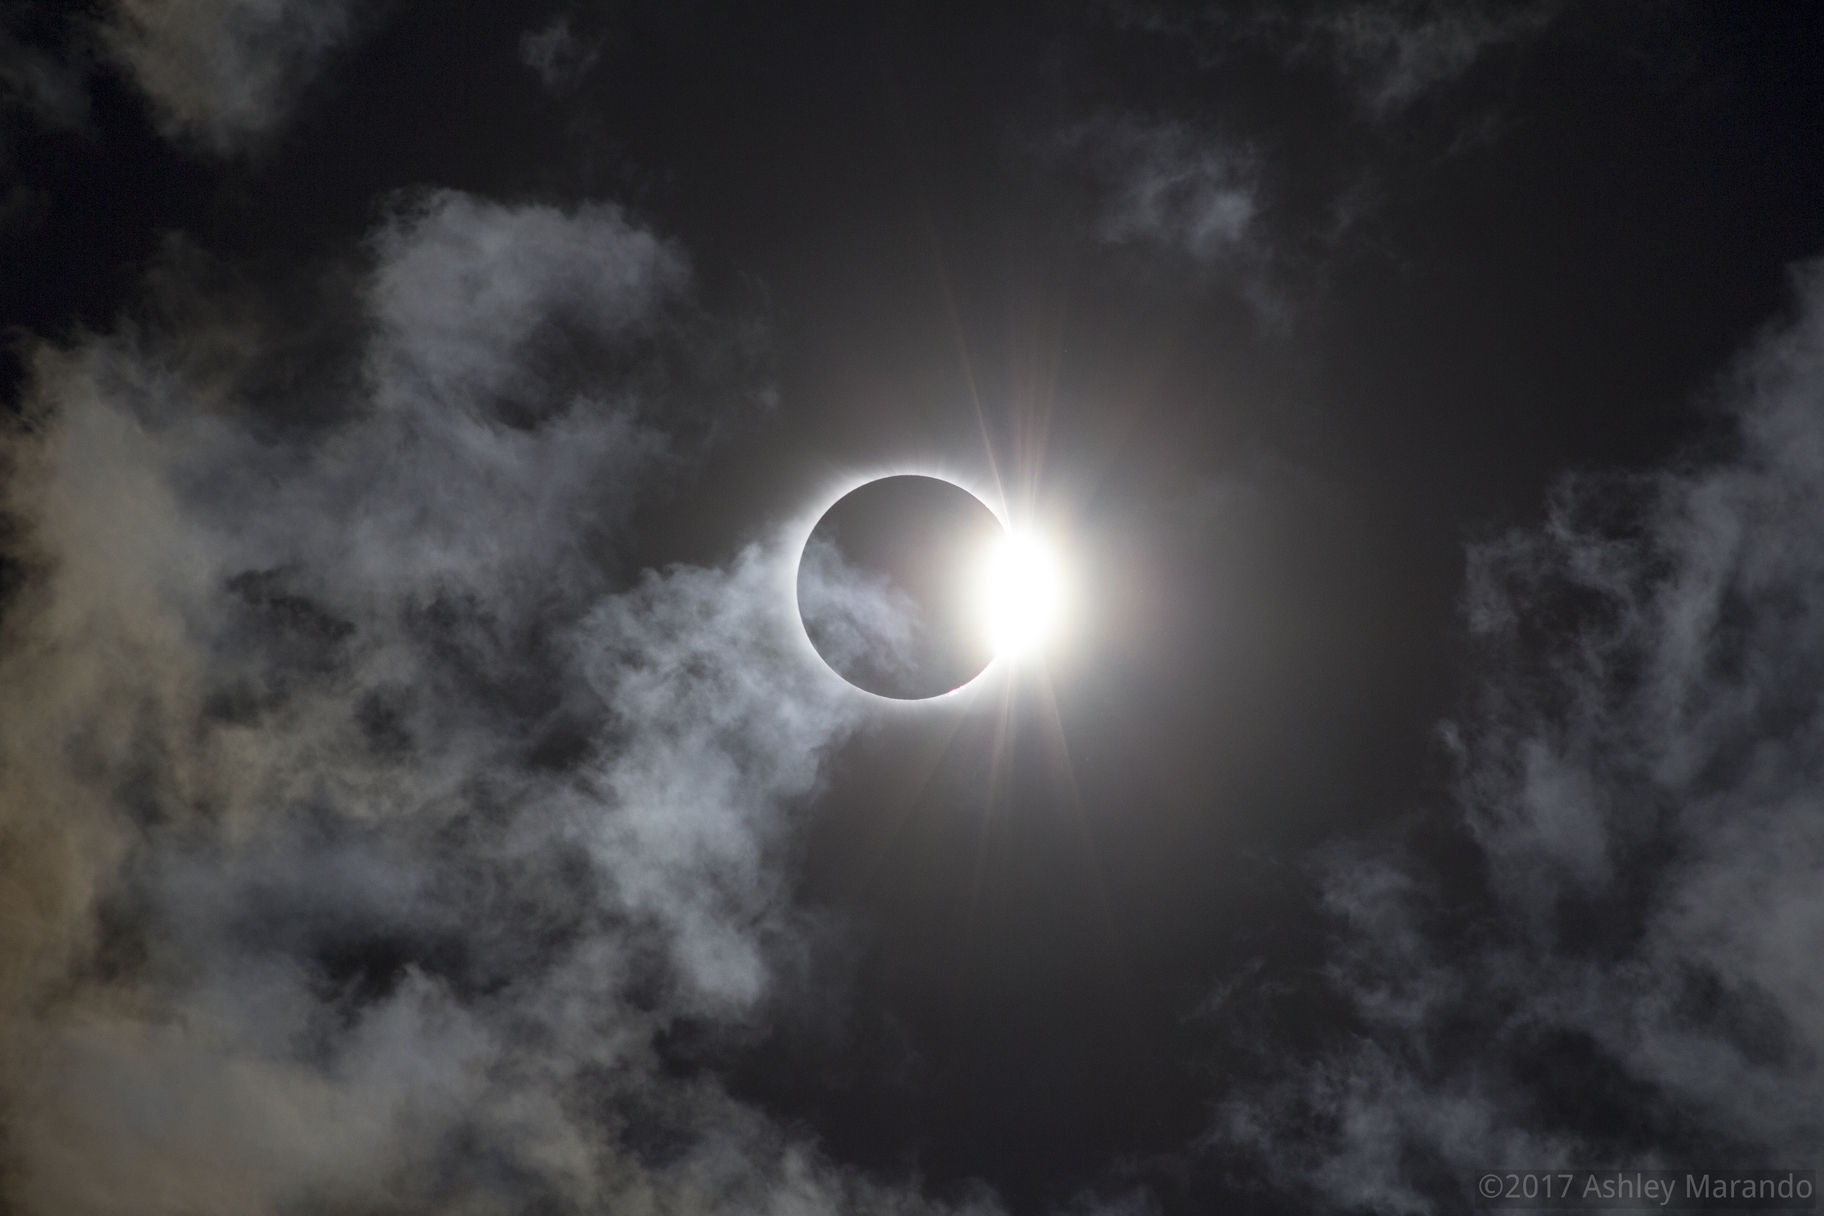 APOD: 2017 August 25 - Diamond Ring in a Cloudy Sky